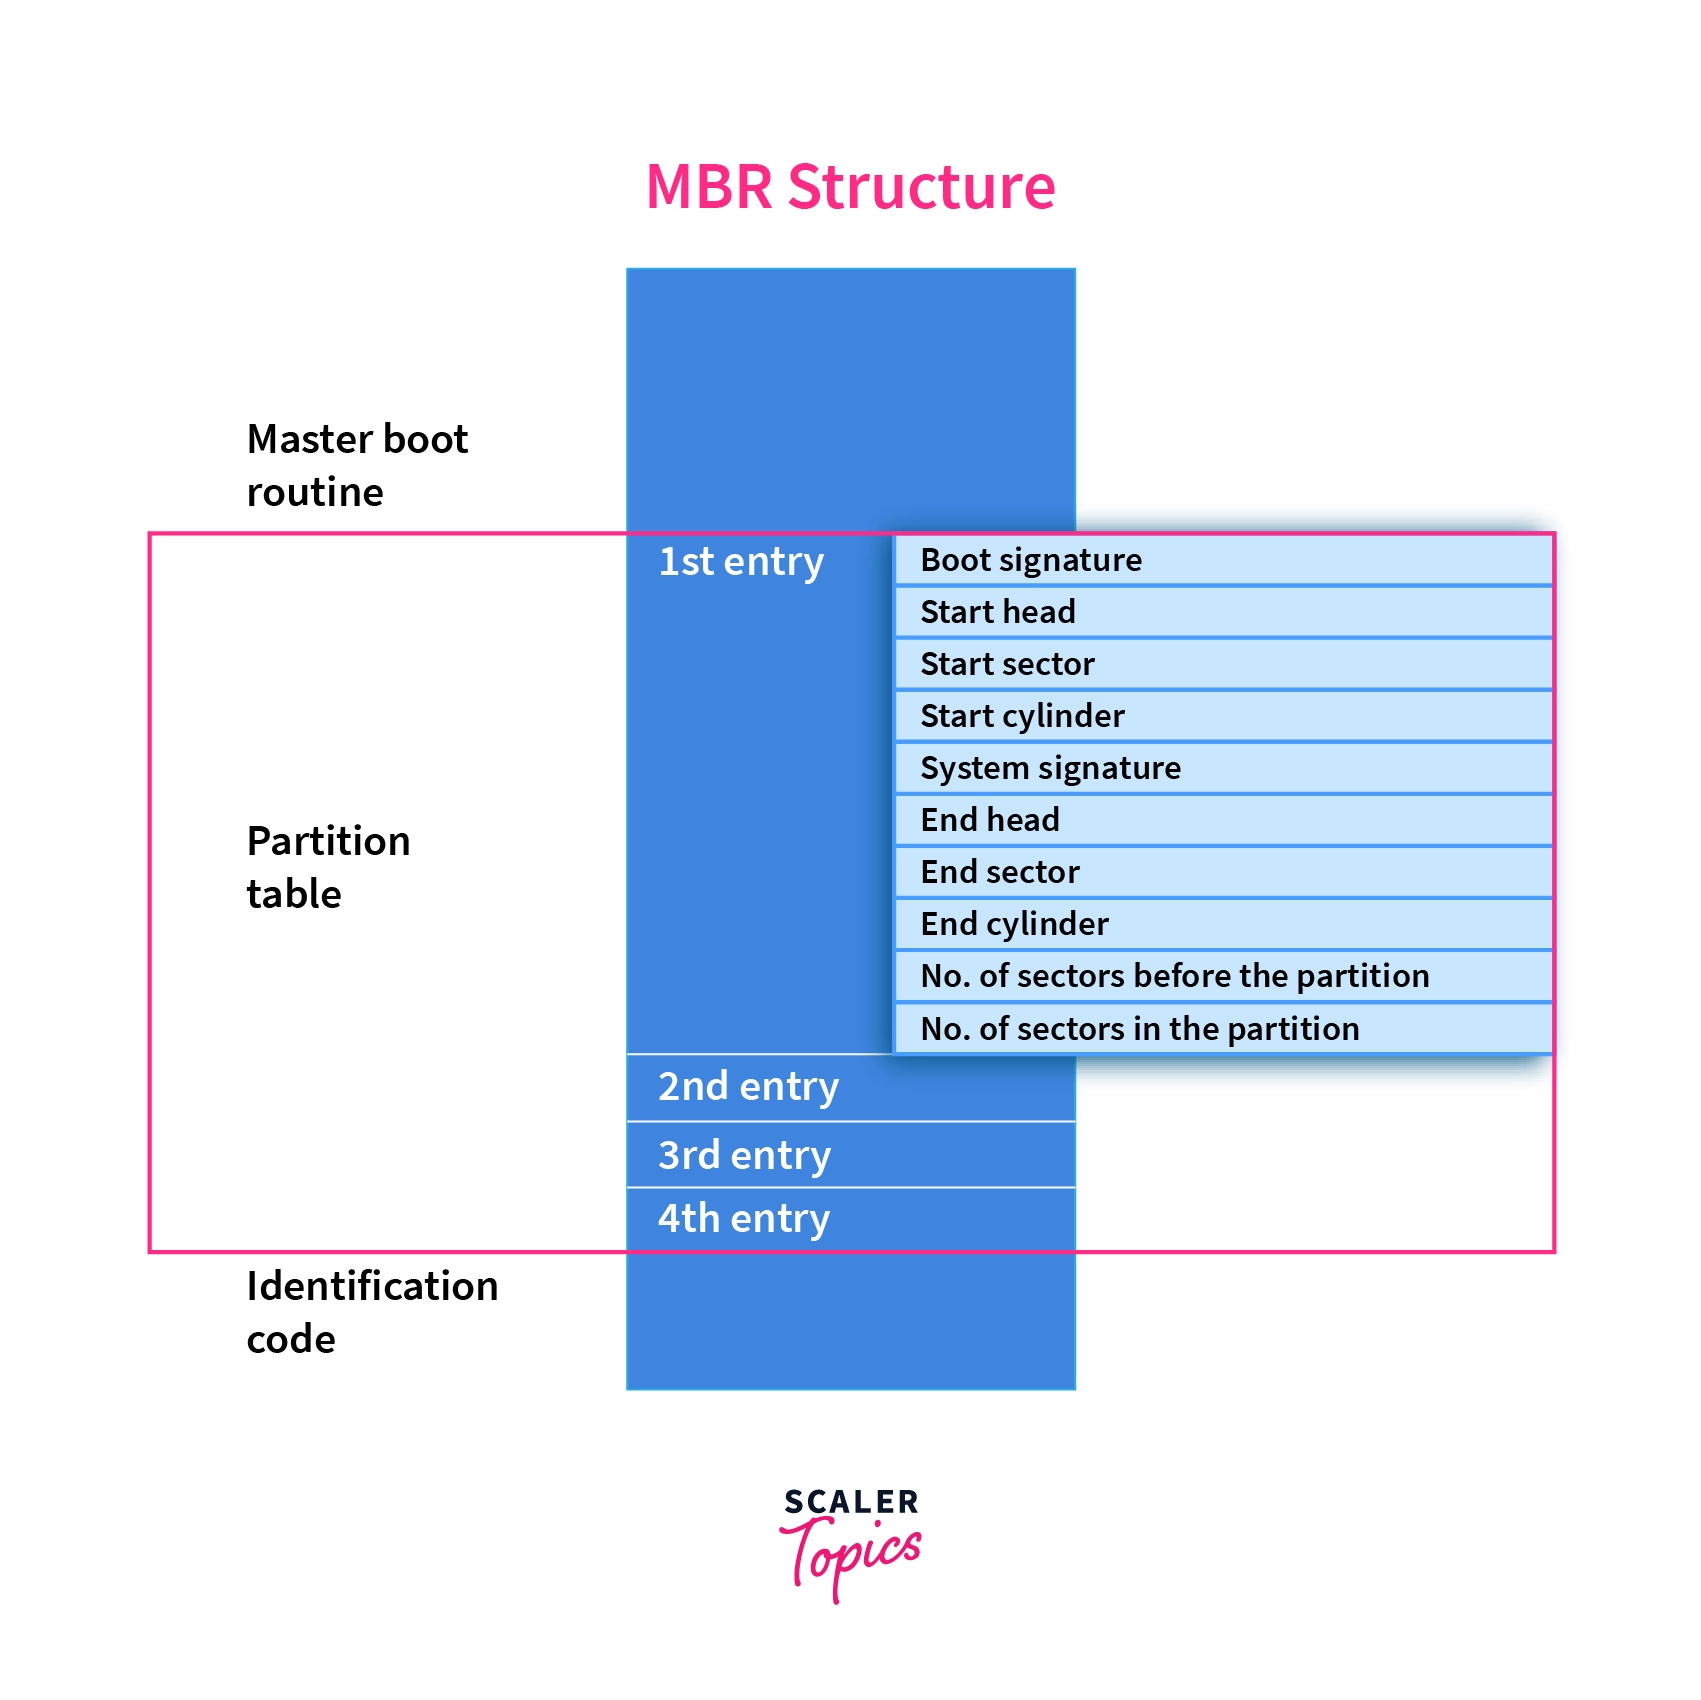 Structure of the MBR